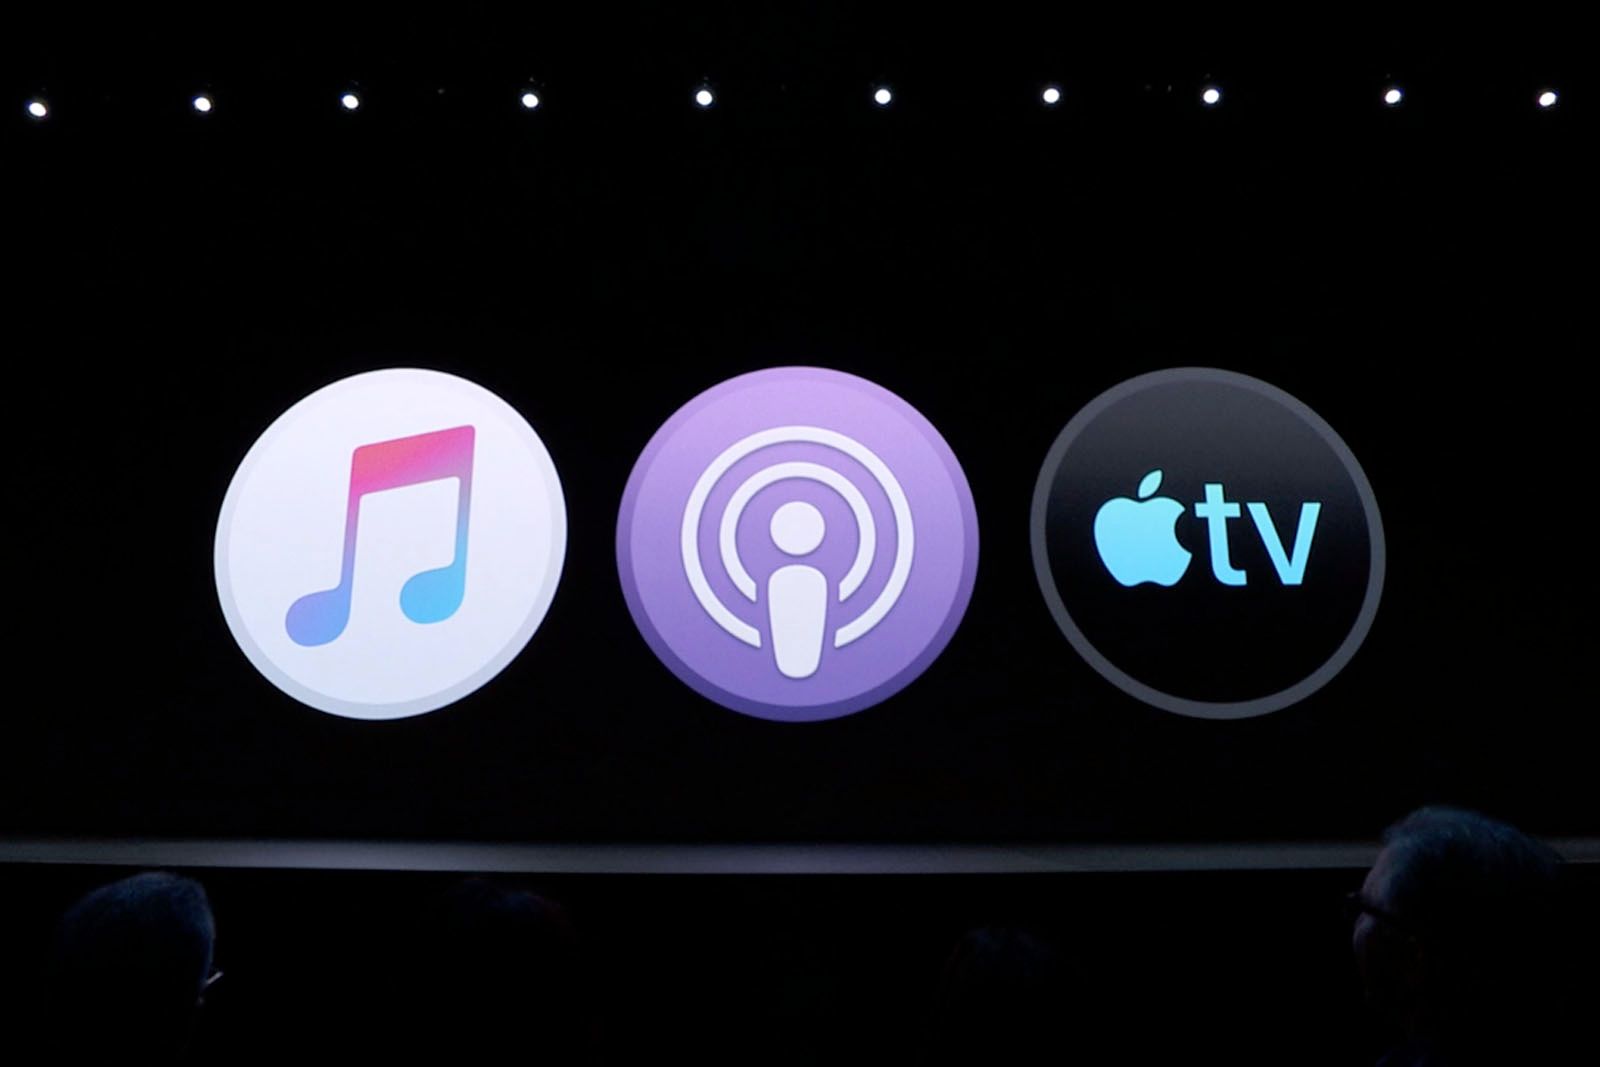 Apples Macos 1015 Update Brings All-new Music Podcast And Tv Apps image 1